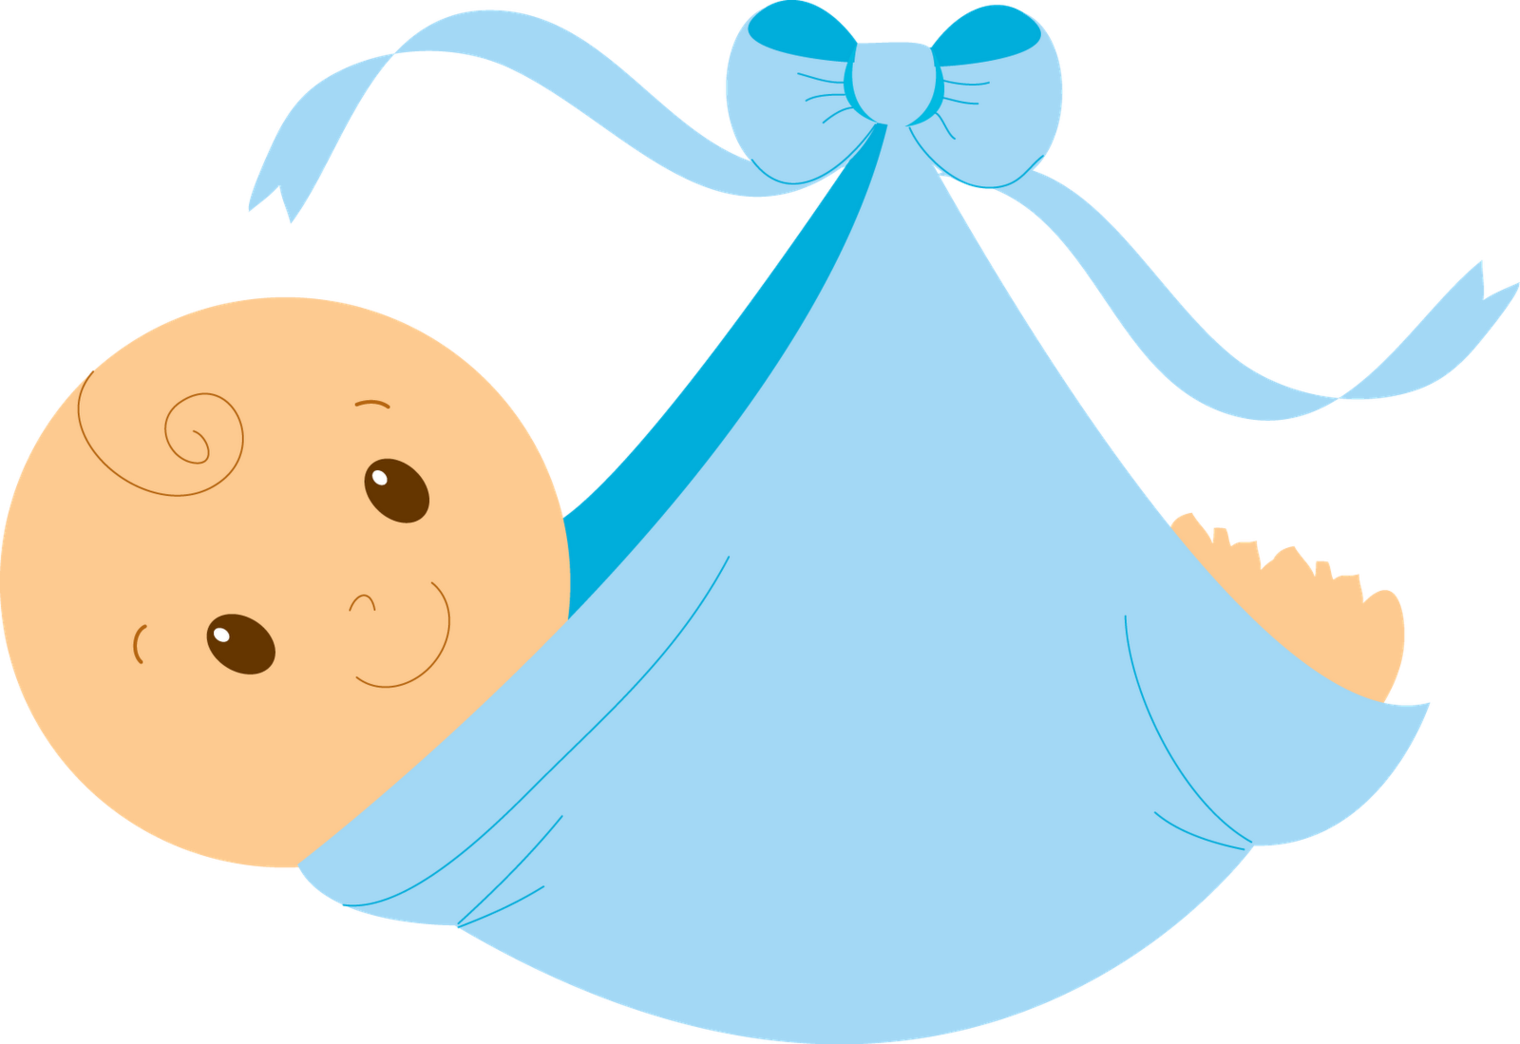 Free clipart for baby shower invitations - ClipartFox